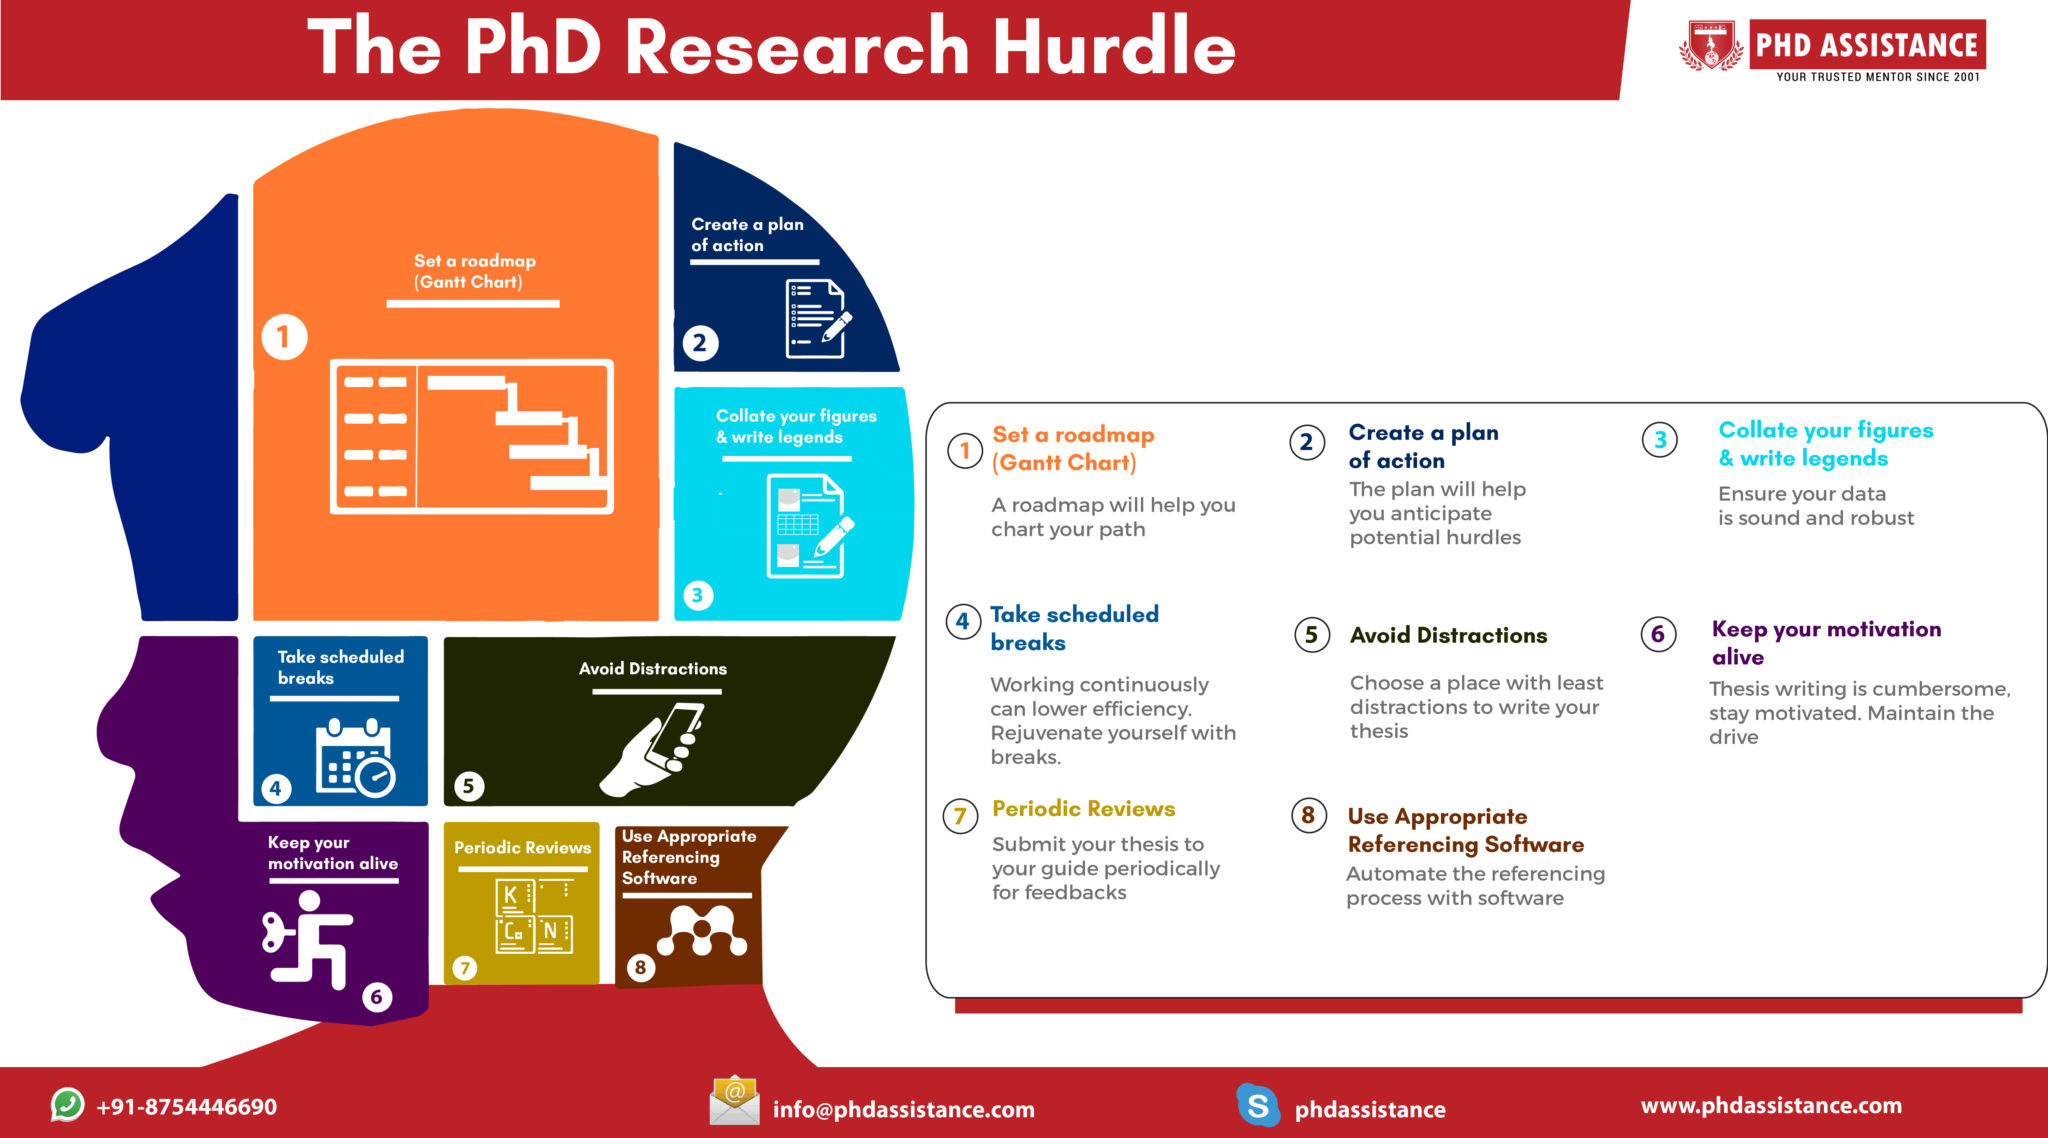 The PhD Research Hurdle